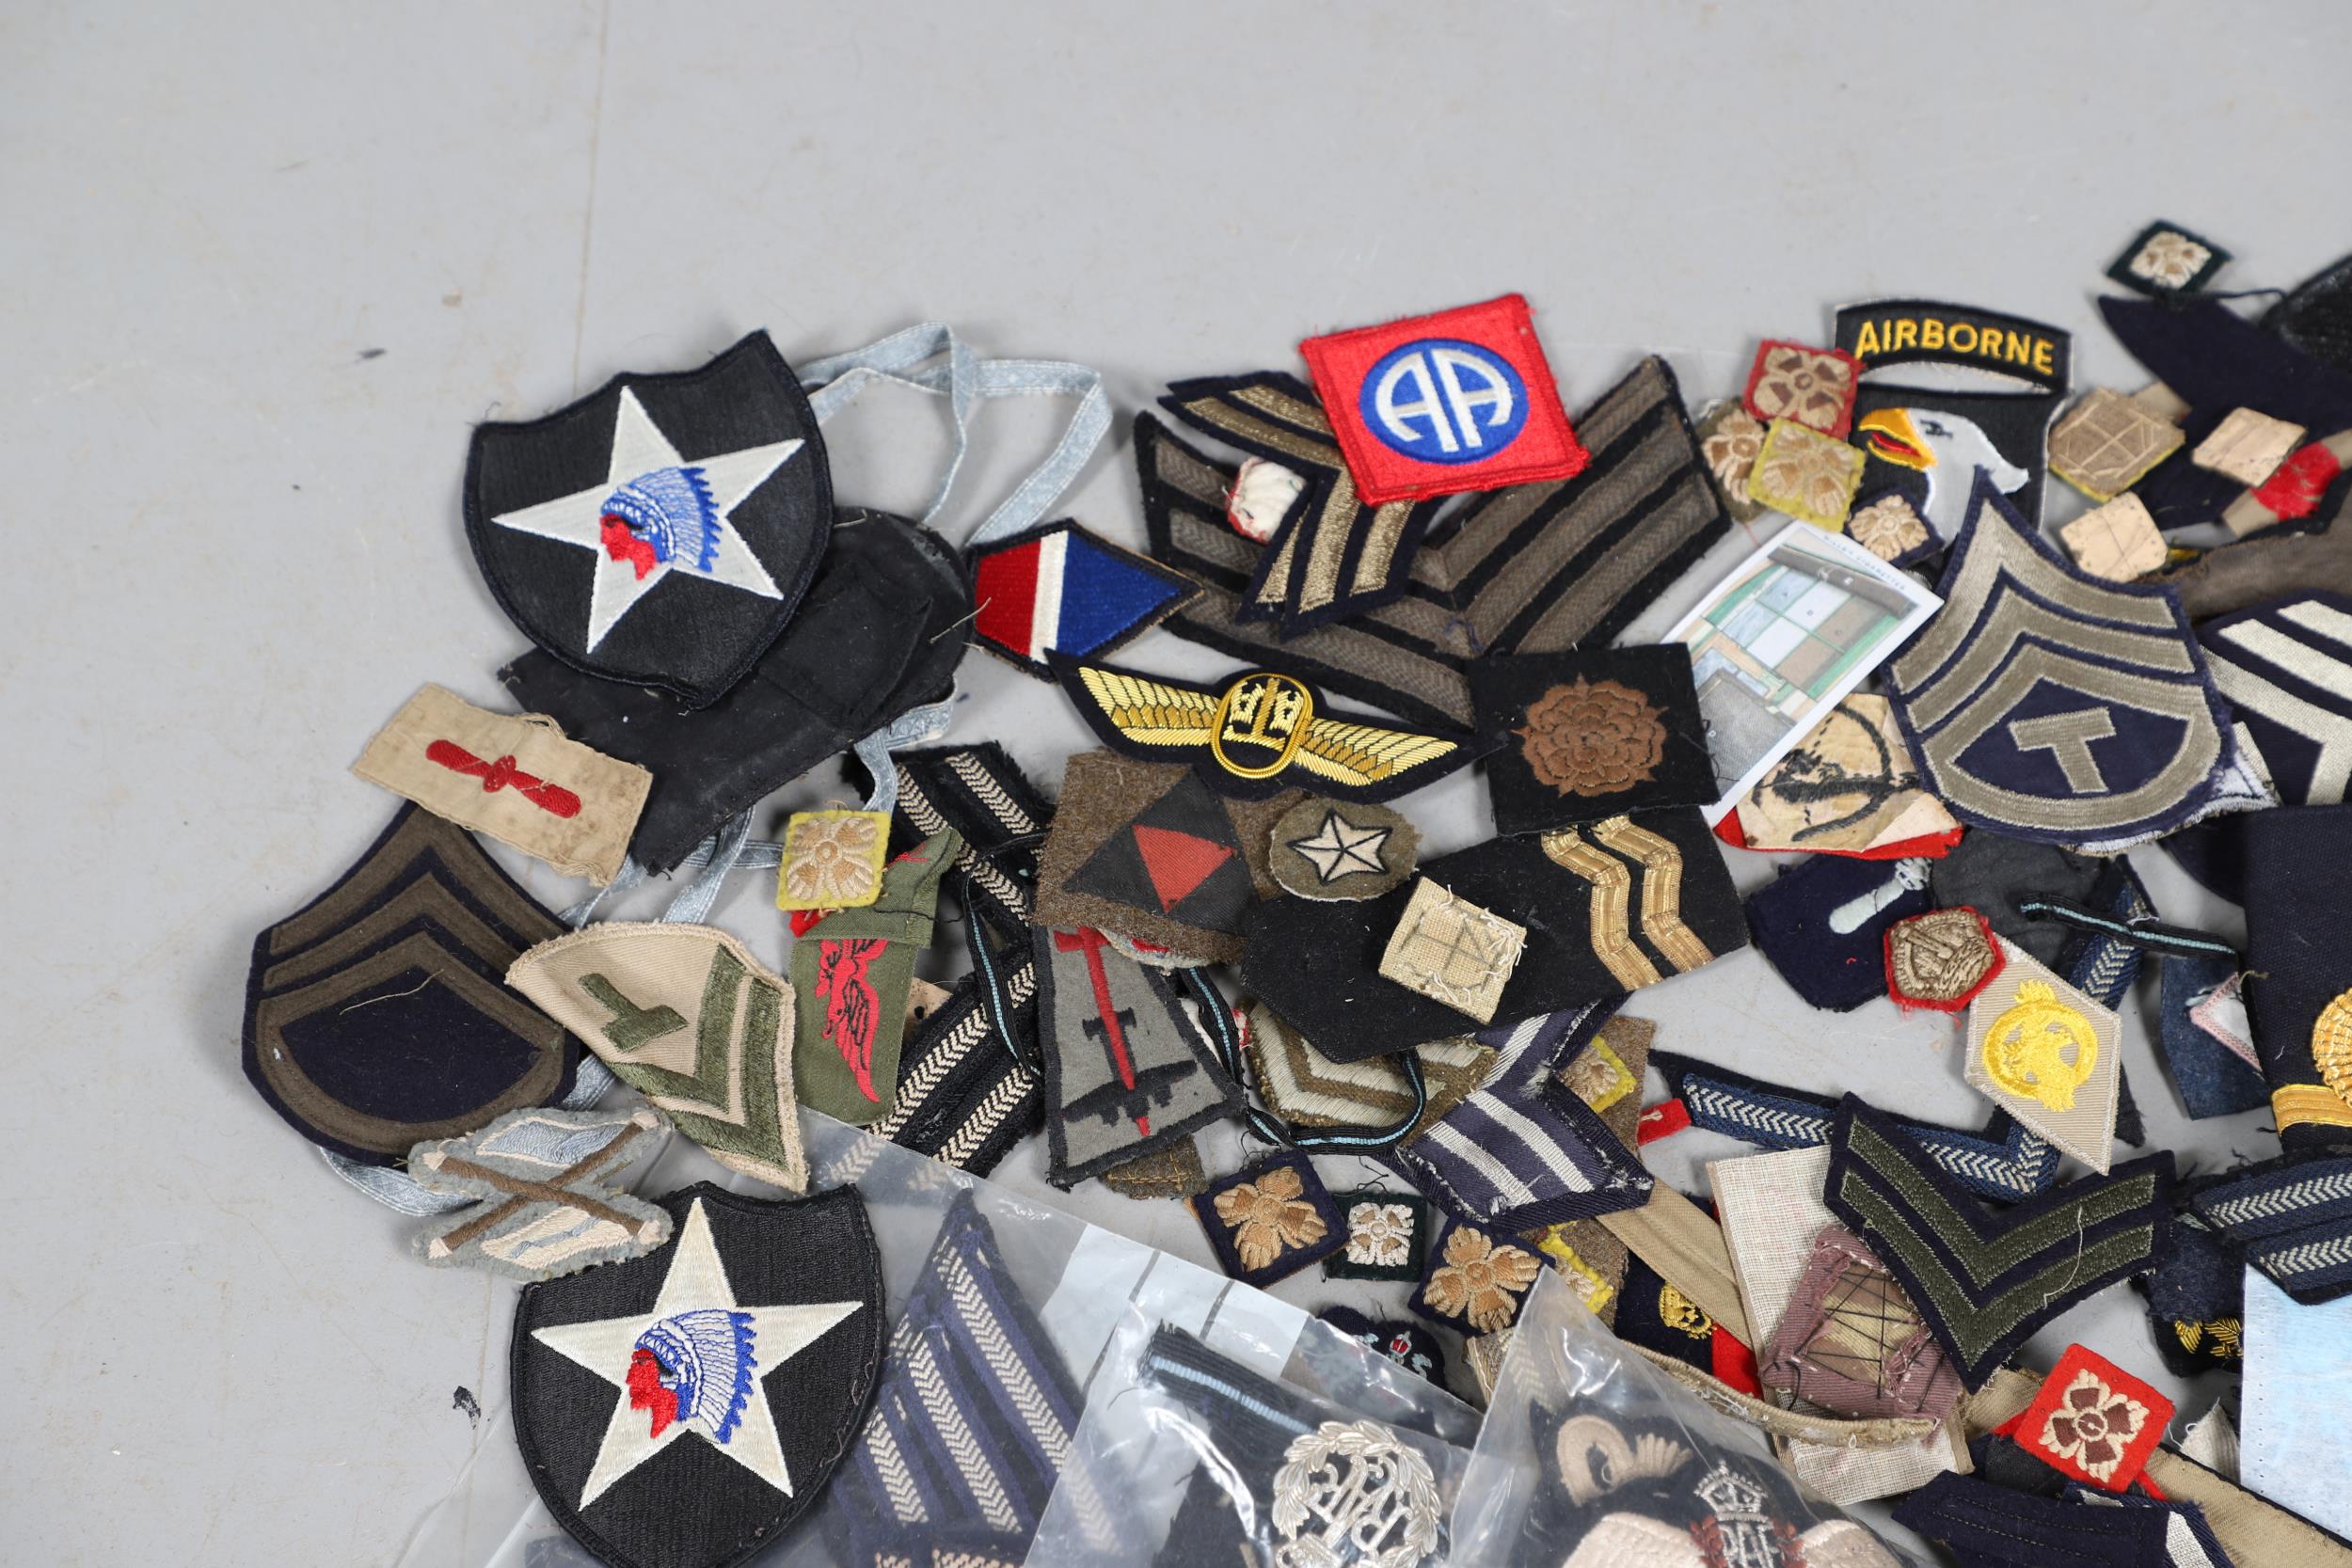 AN EXTENSIVE COLLECTION OF ARMY AND AIR FORCE UNIFORM PATCHES AND RANK INSIGNIA. - Image 4 of 14